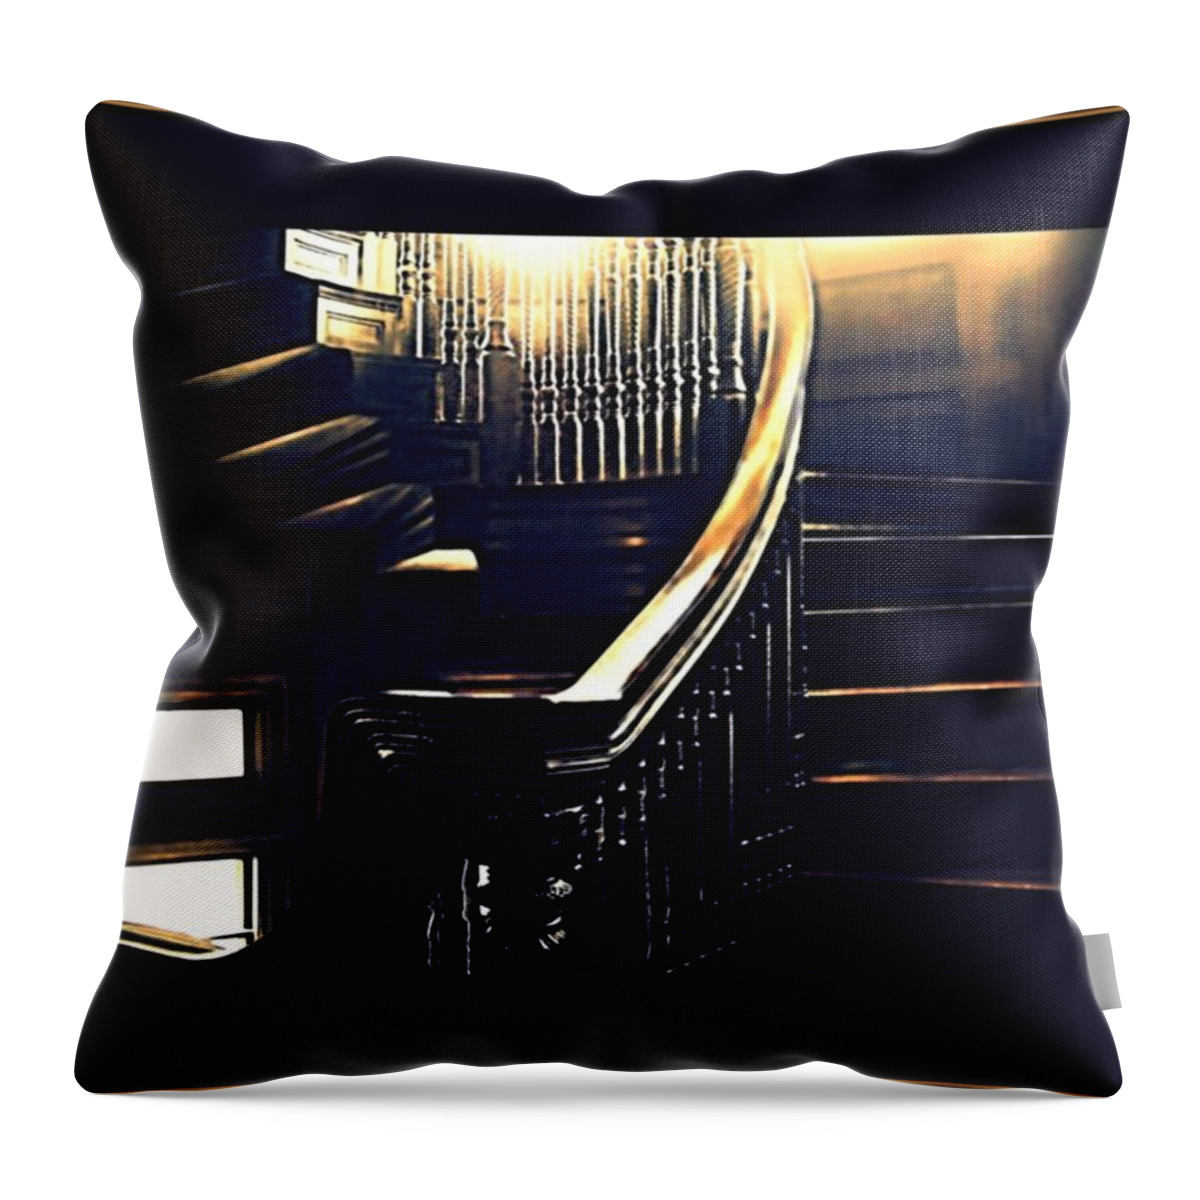  Noble And Greenough School Throw Pillow featuring the photograph Days Gone By by Marysue Ryan